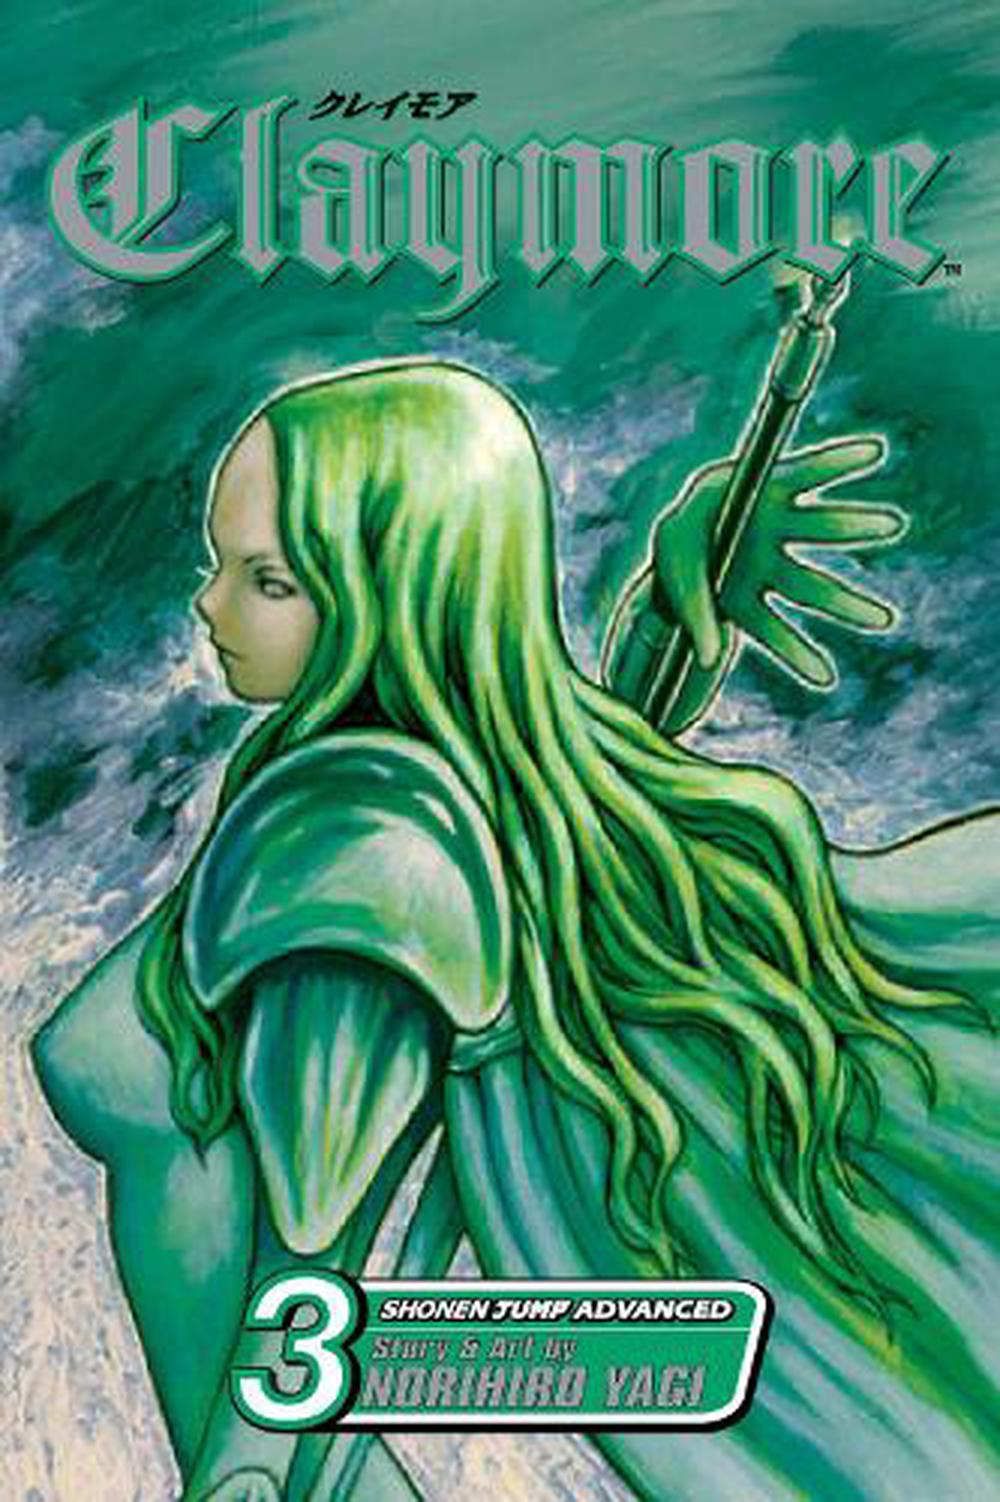 Claymore Volume 3 By Norihiro Yagi Paperback Buy Online At The Nile